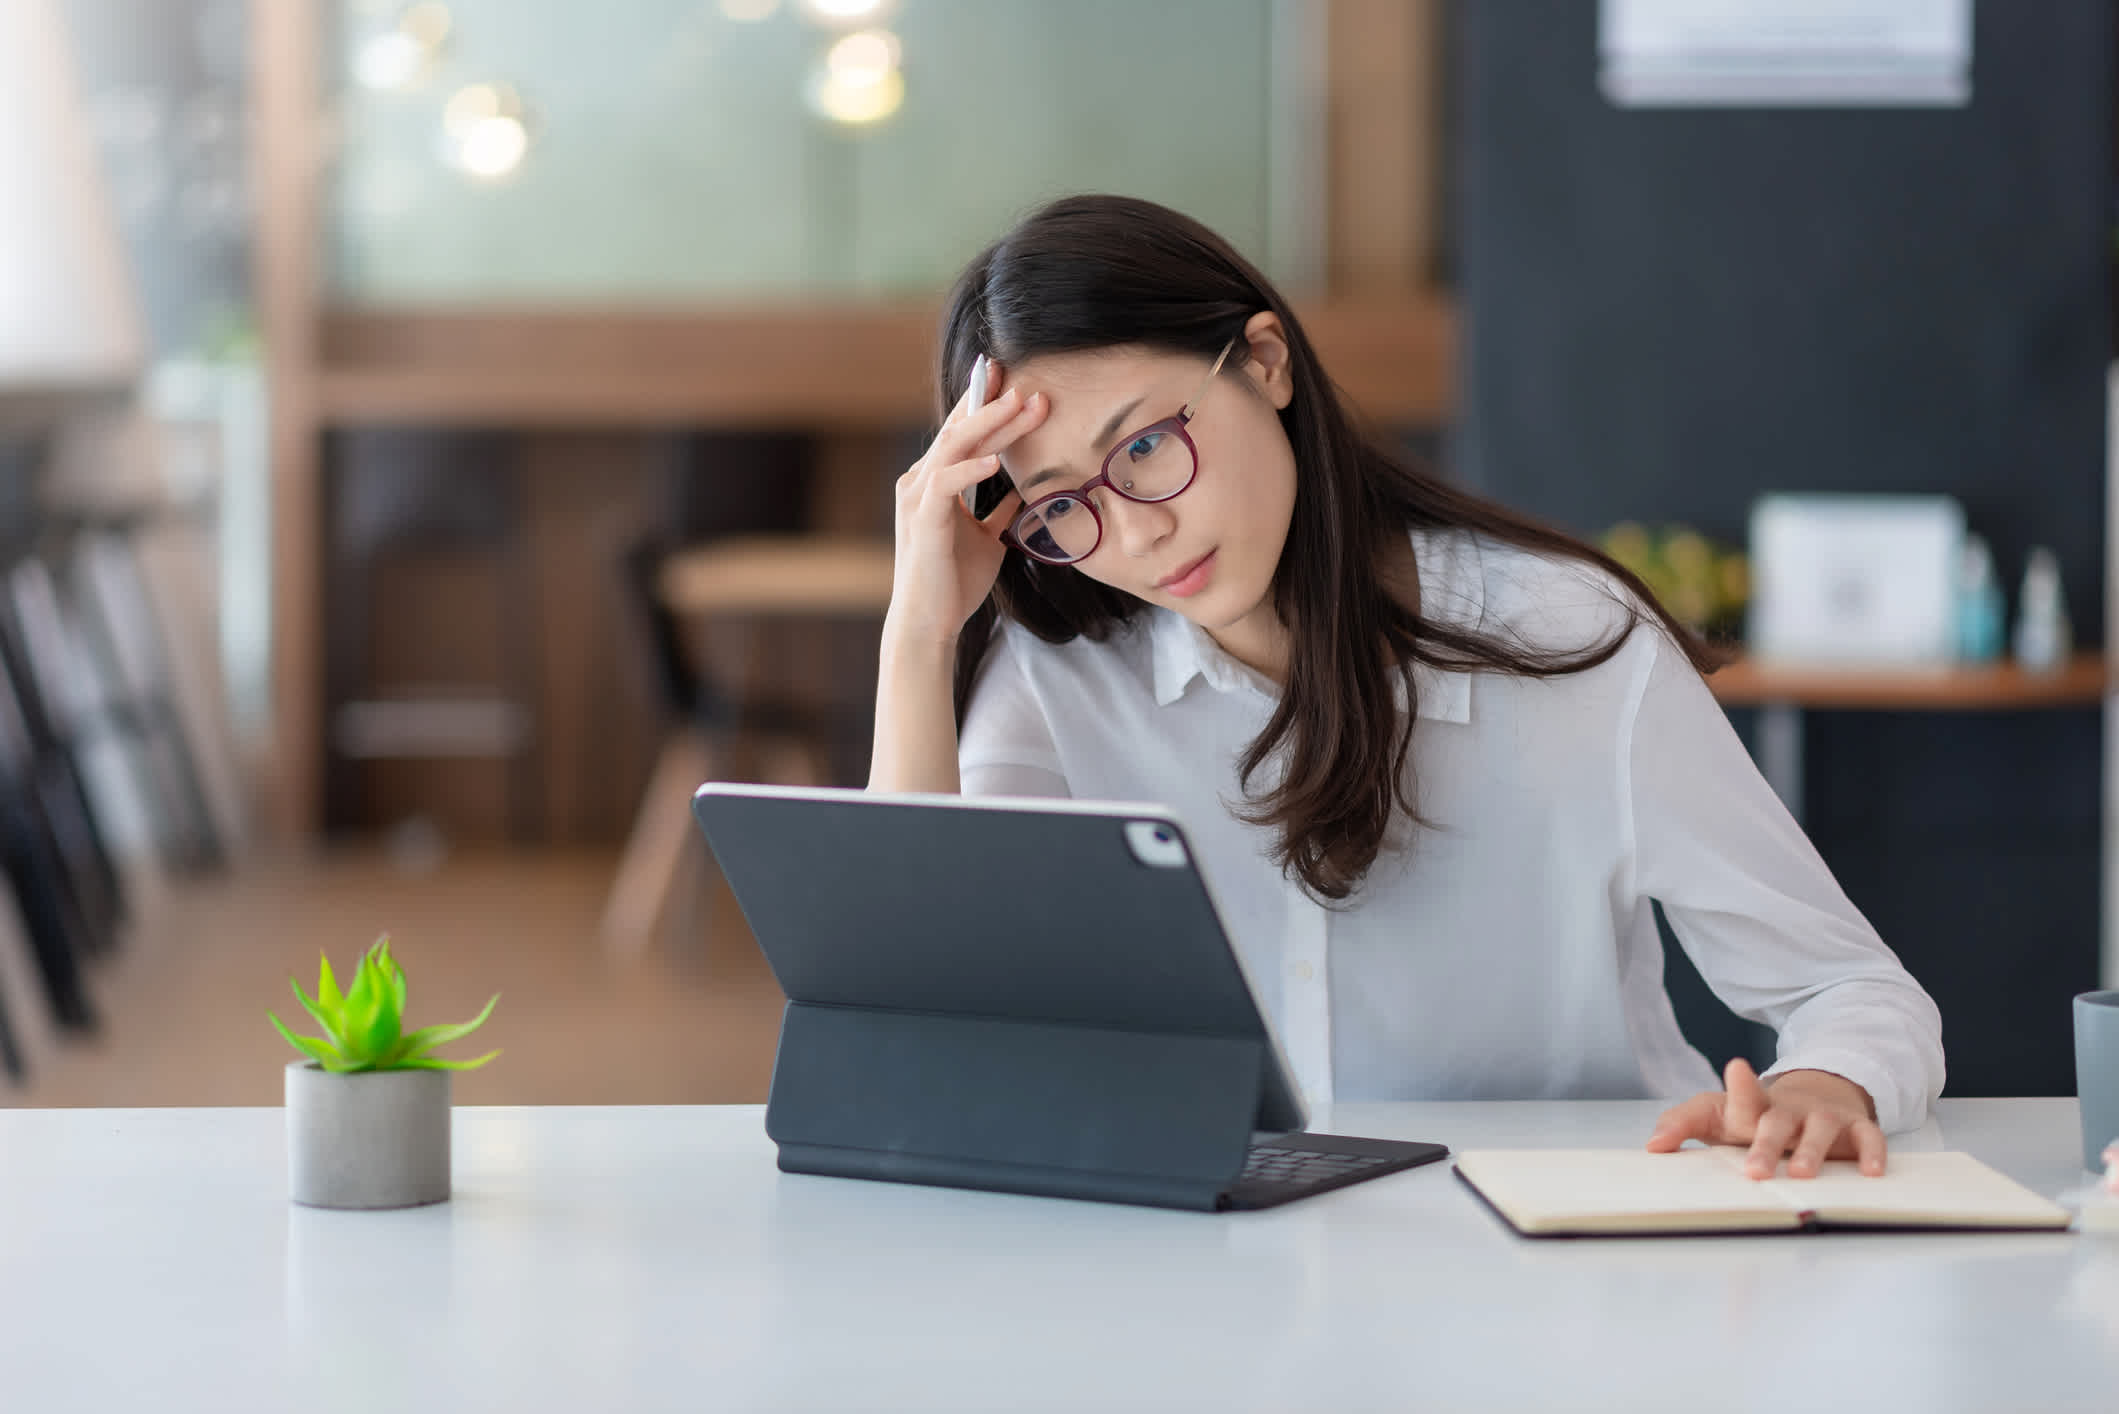 Image of an Asian woman who is tired and overthinking from working with a tablet at the office.

